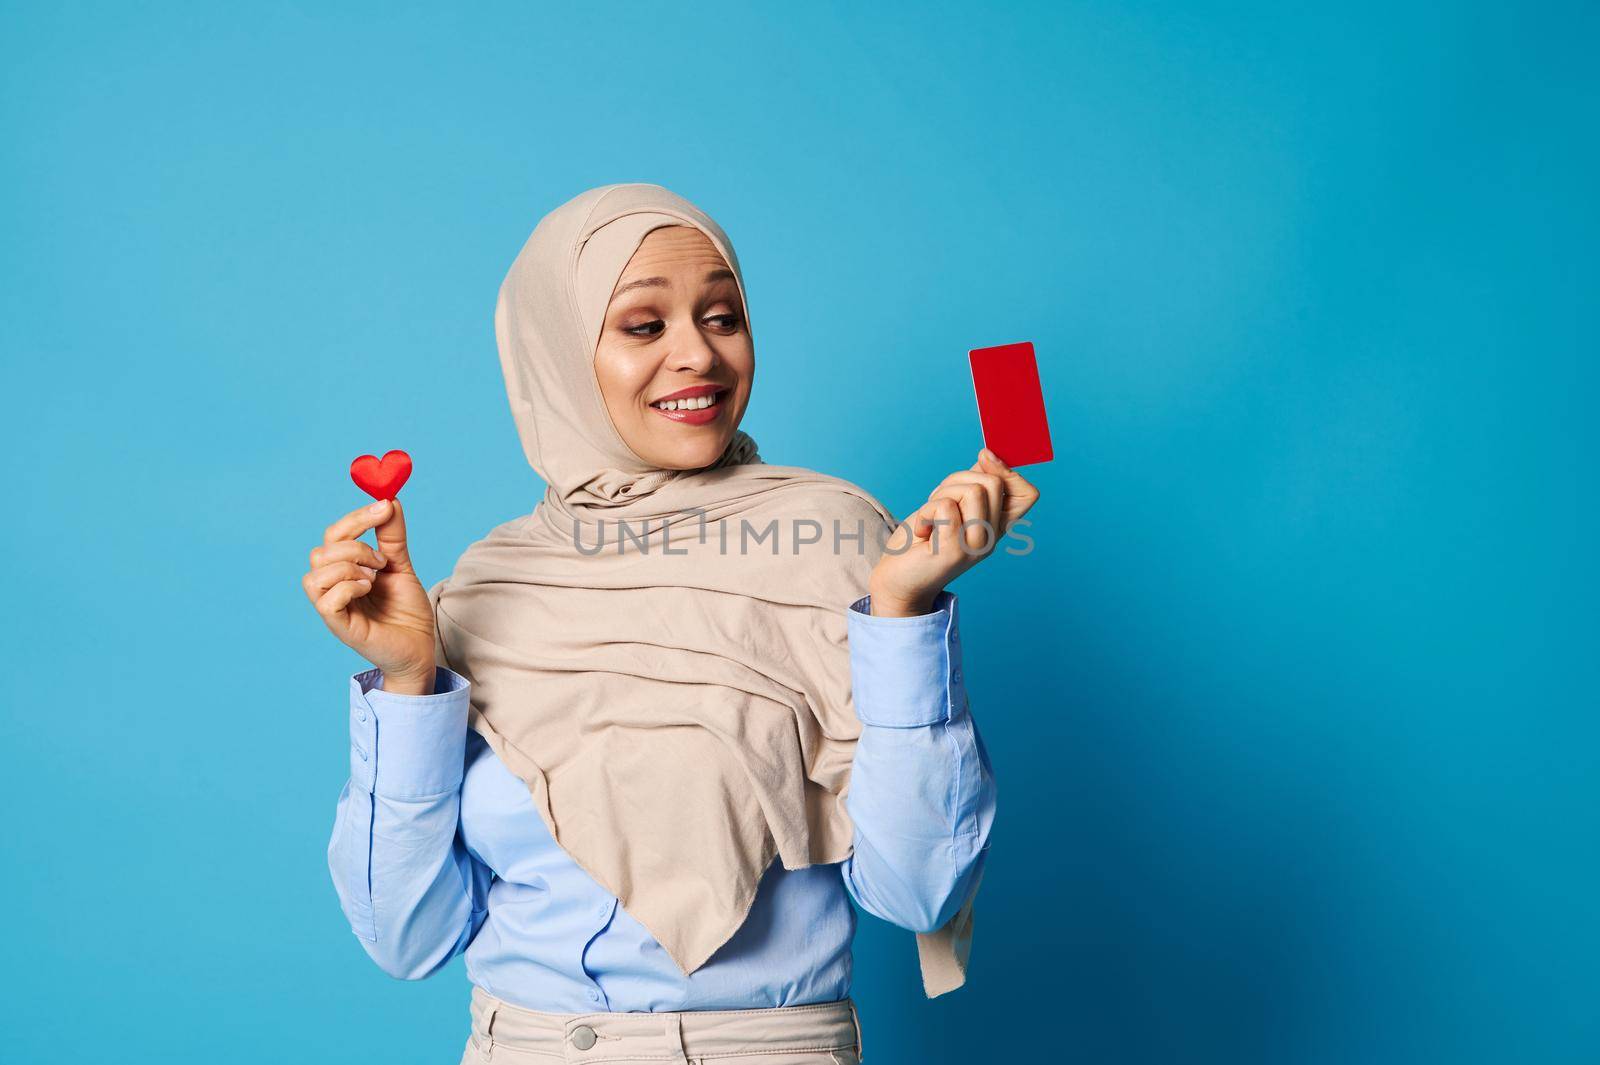 Smiling woman with oriental appearance wearing hijab, holding a shape of heart in one hand and looking at a red plastic blank card in her other hand. Blue background, copy space